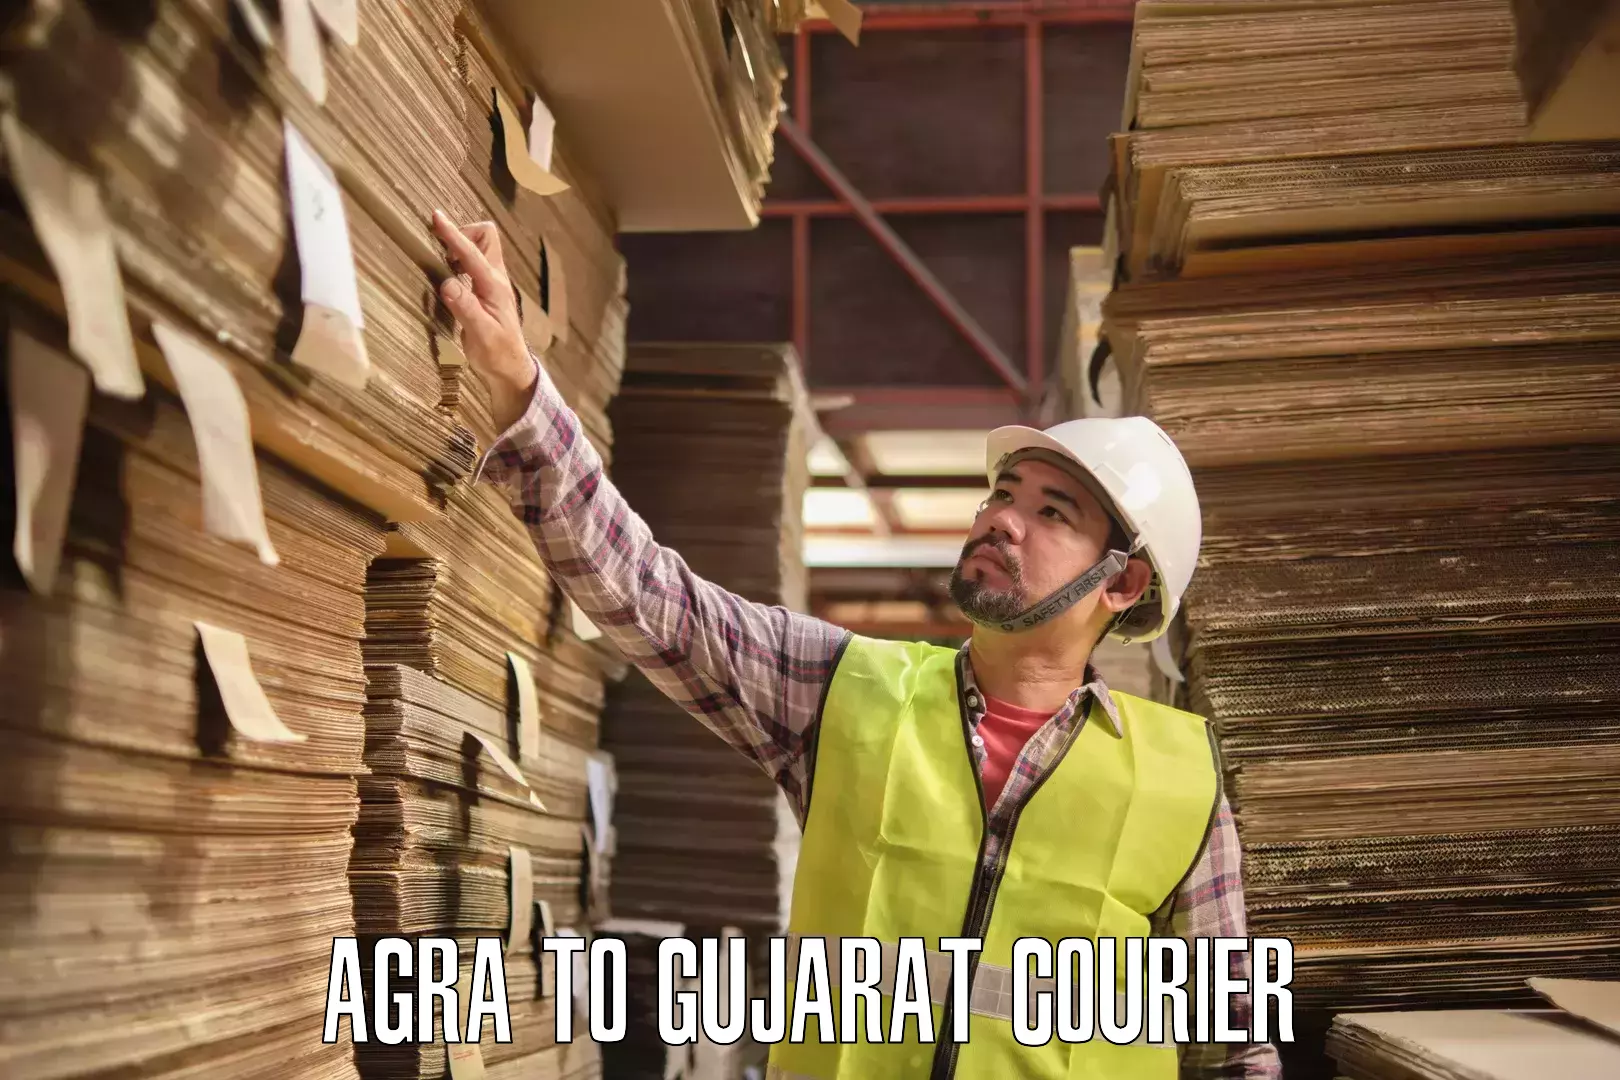 Cash on delivery service Agra to Gujarat